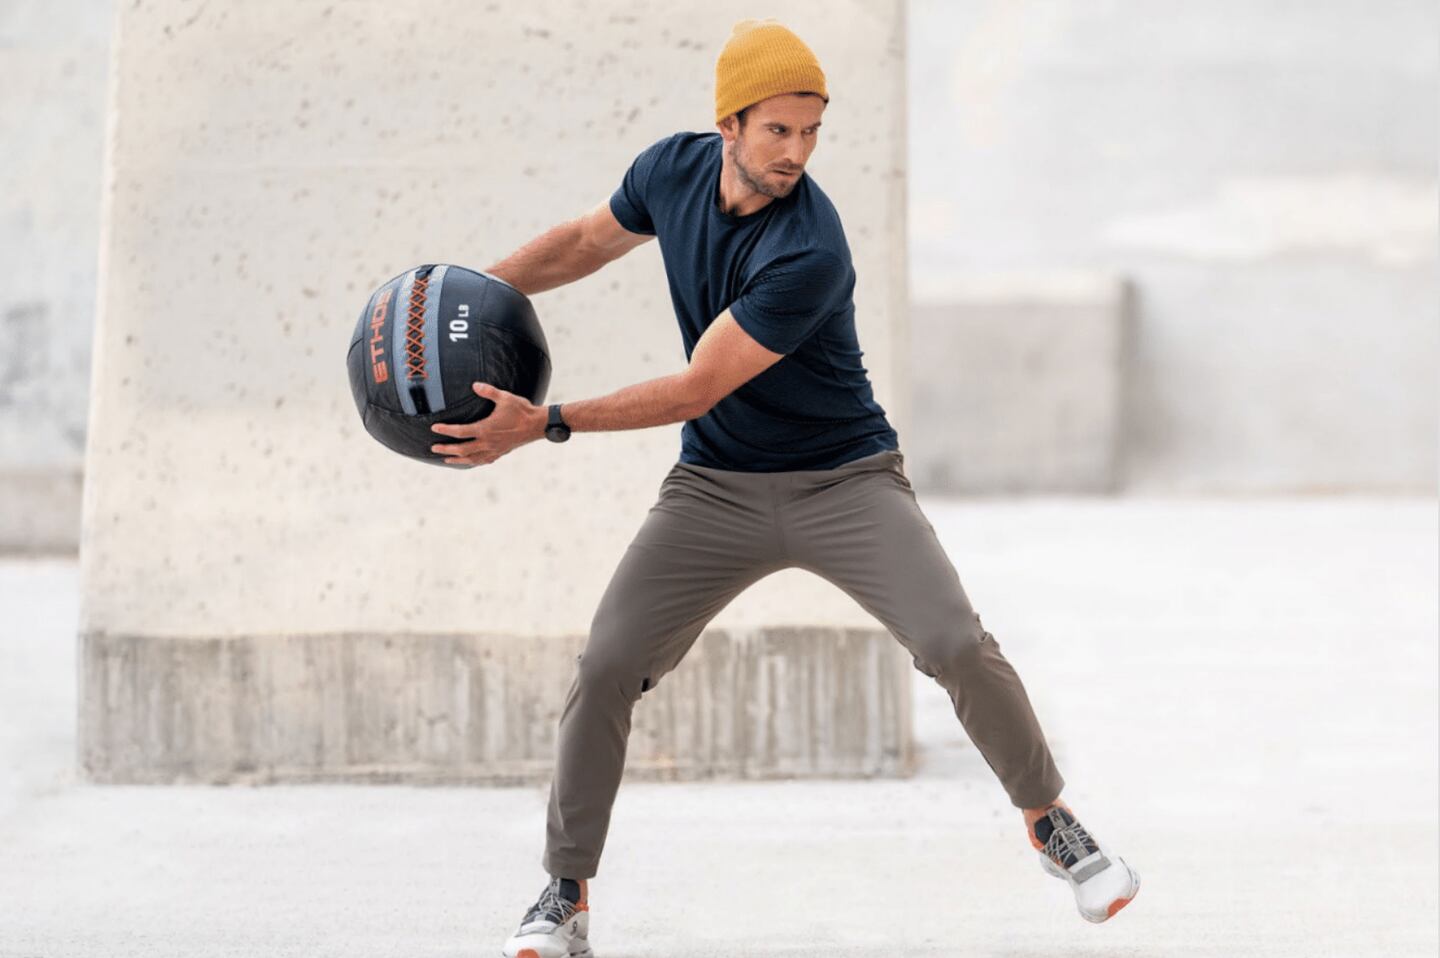 Activewear brand Vuori has attracted investment from Softbank.